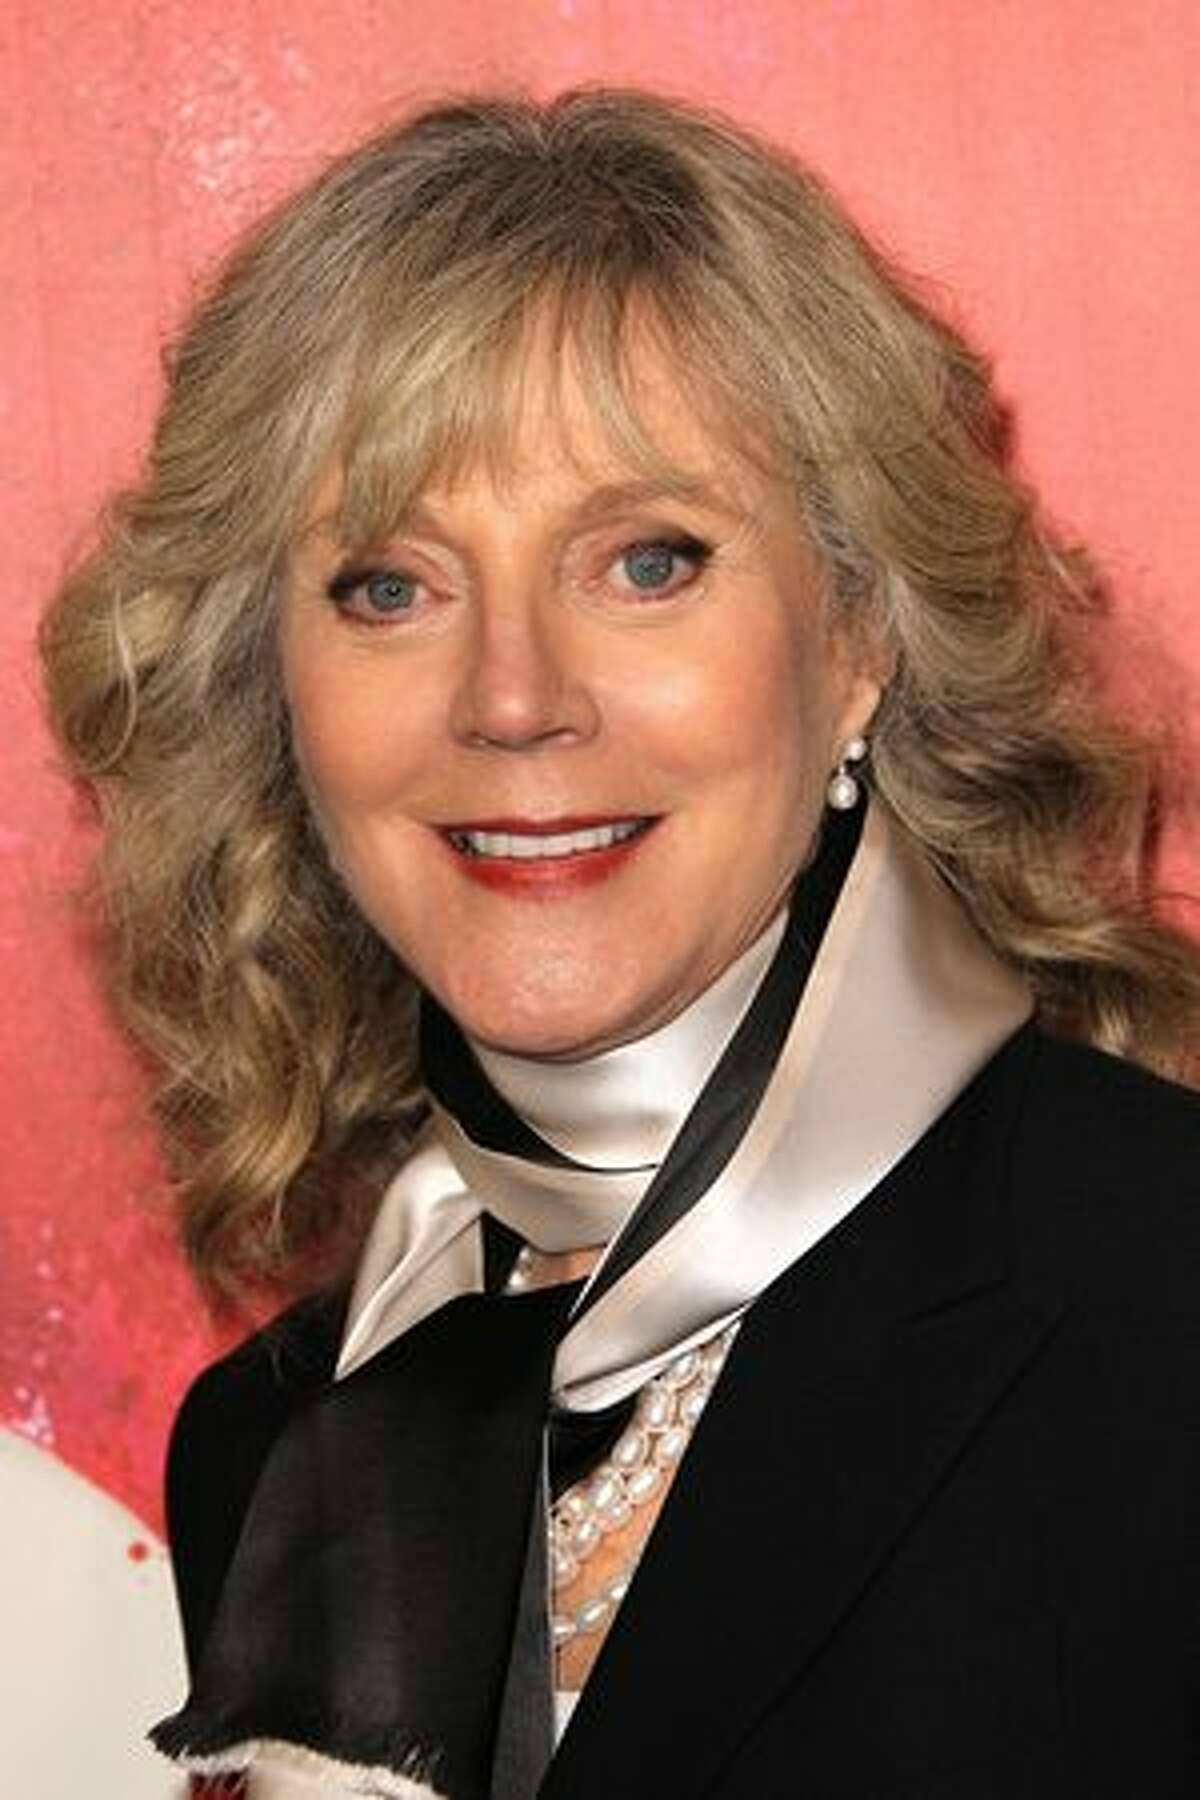 Actress Blythe Danner attends the premiere of "Waiting For Forever" at The Pacific Theatres at the Grove in Los Angeles, California.